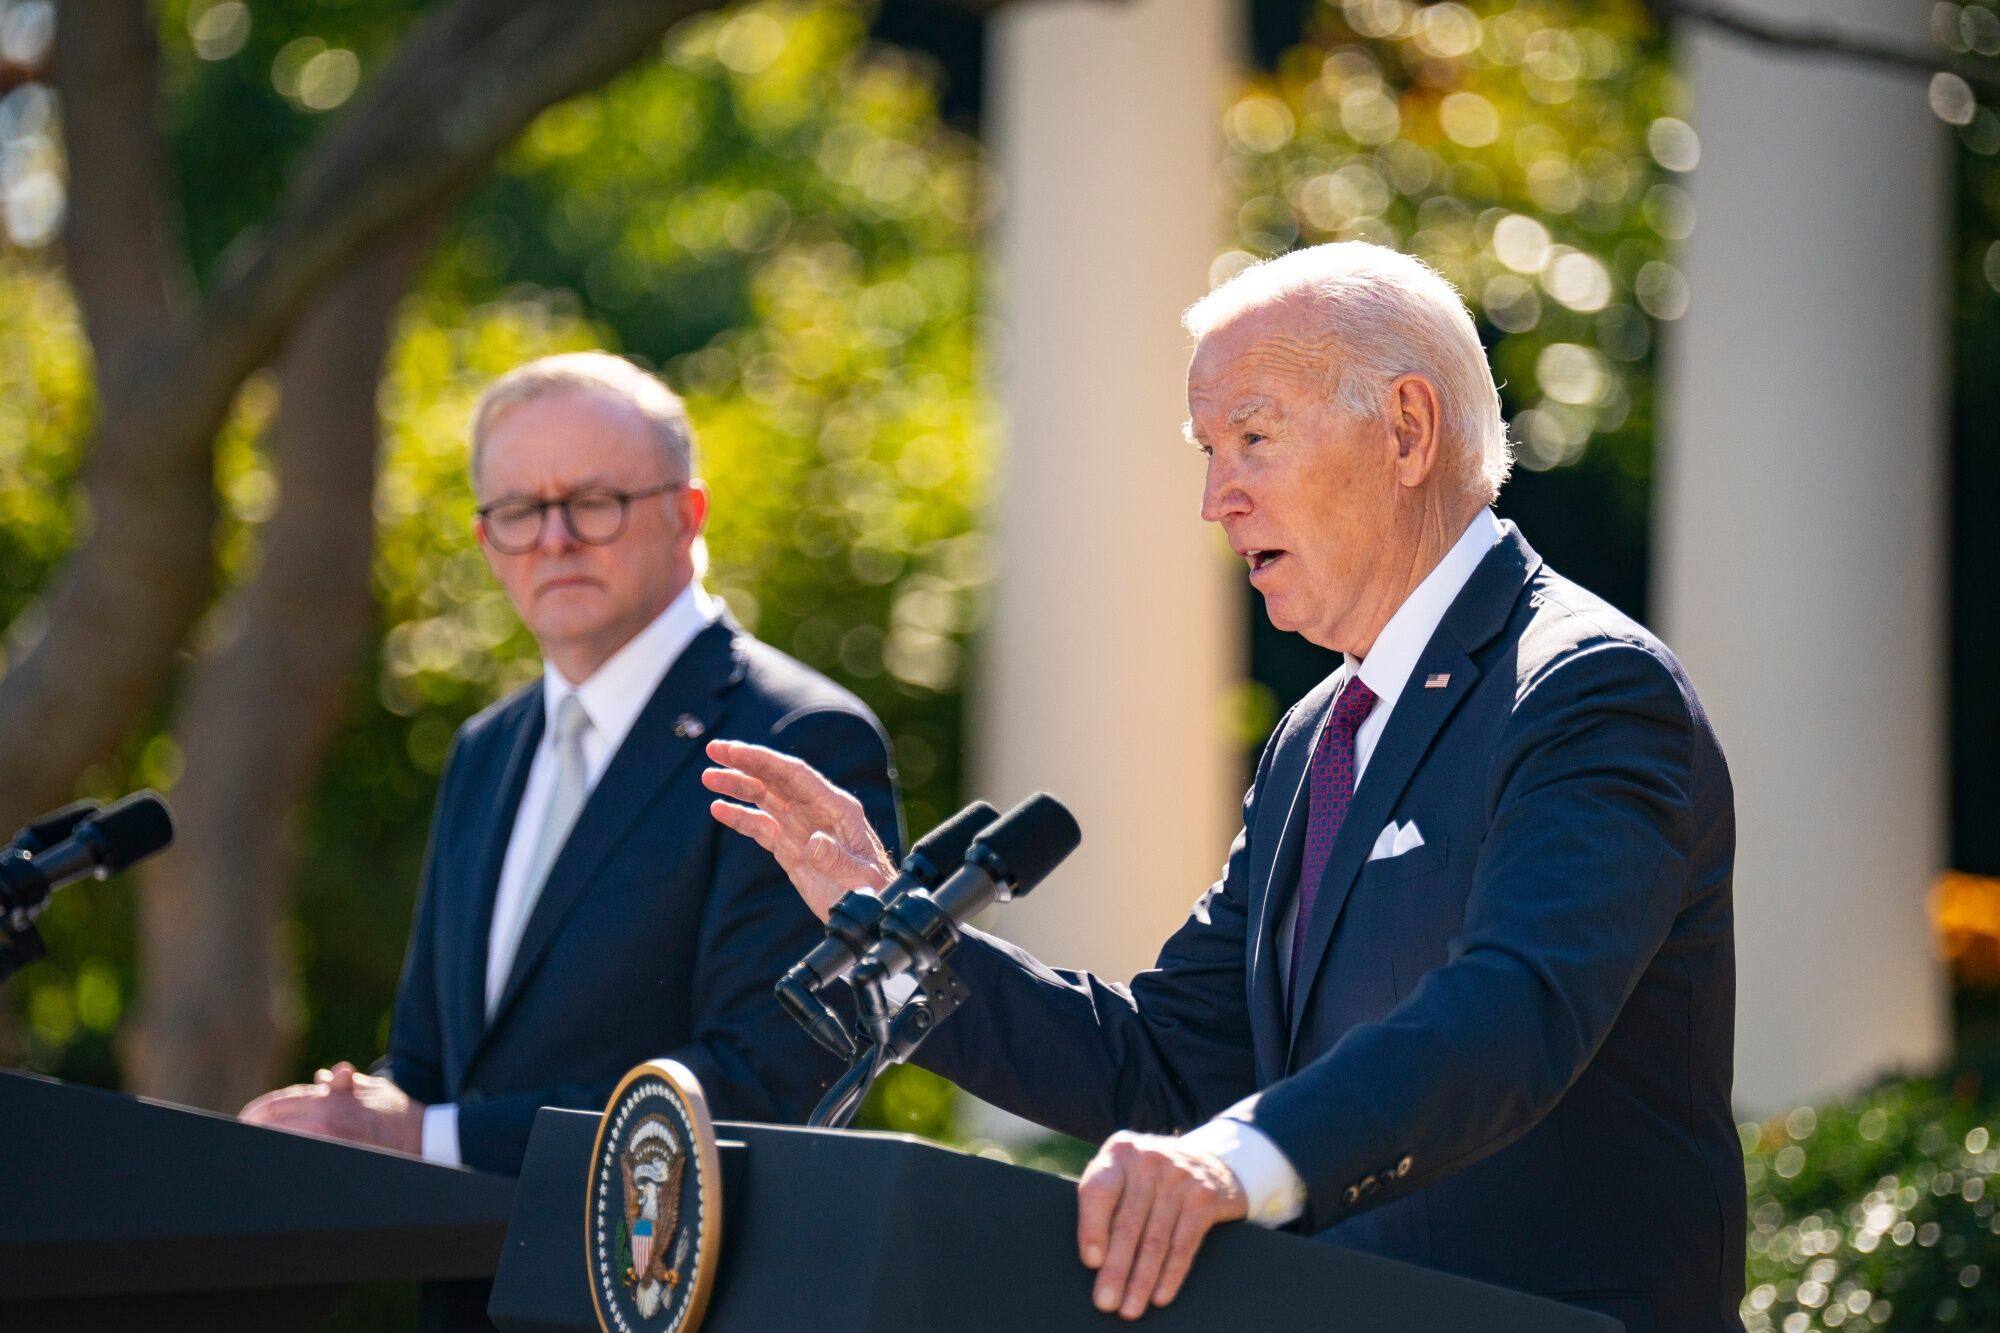 US President Joe Biden (right) speaking at his  joint news conference with Australian Prime Minister Anthony Albanese on Wednesday at the White House. Photo: Bloomberg